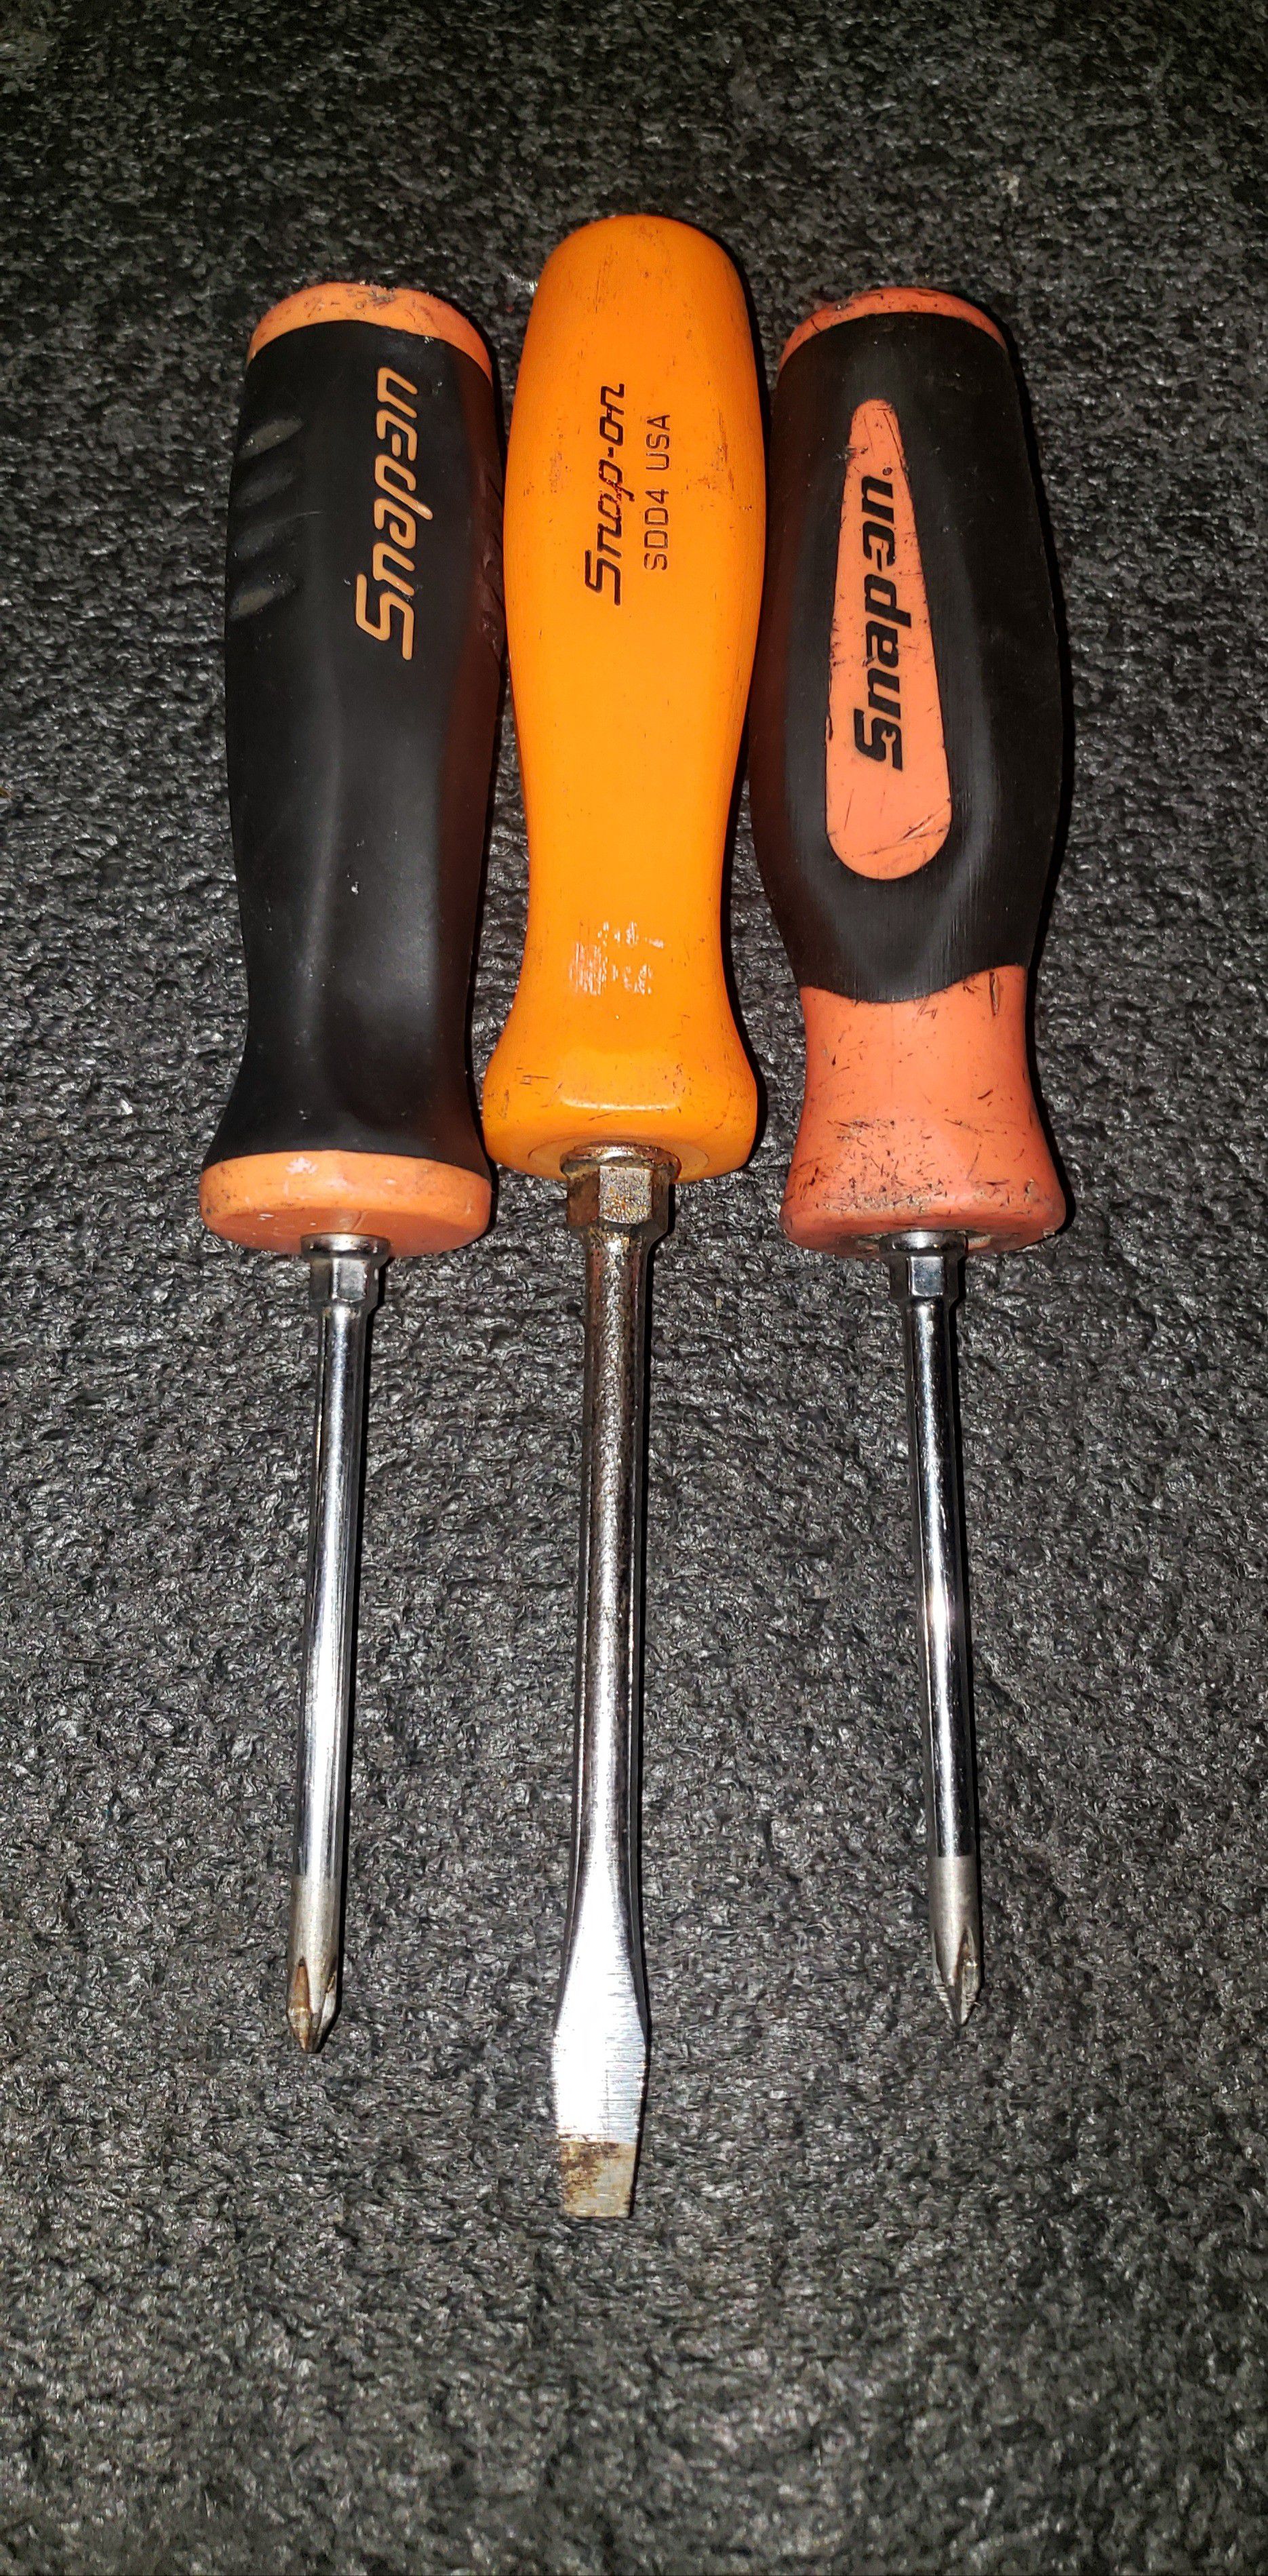 Snap on screwdrivers